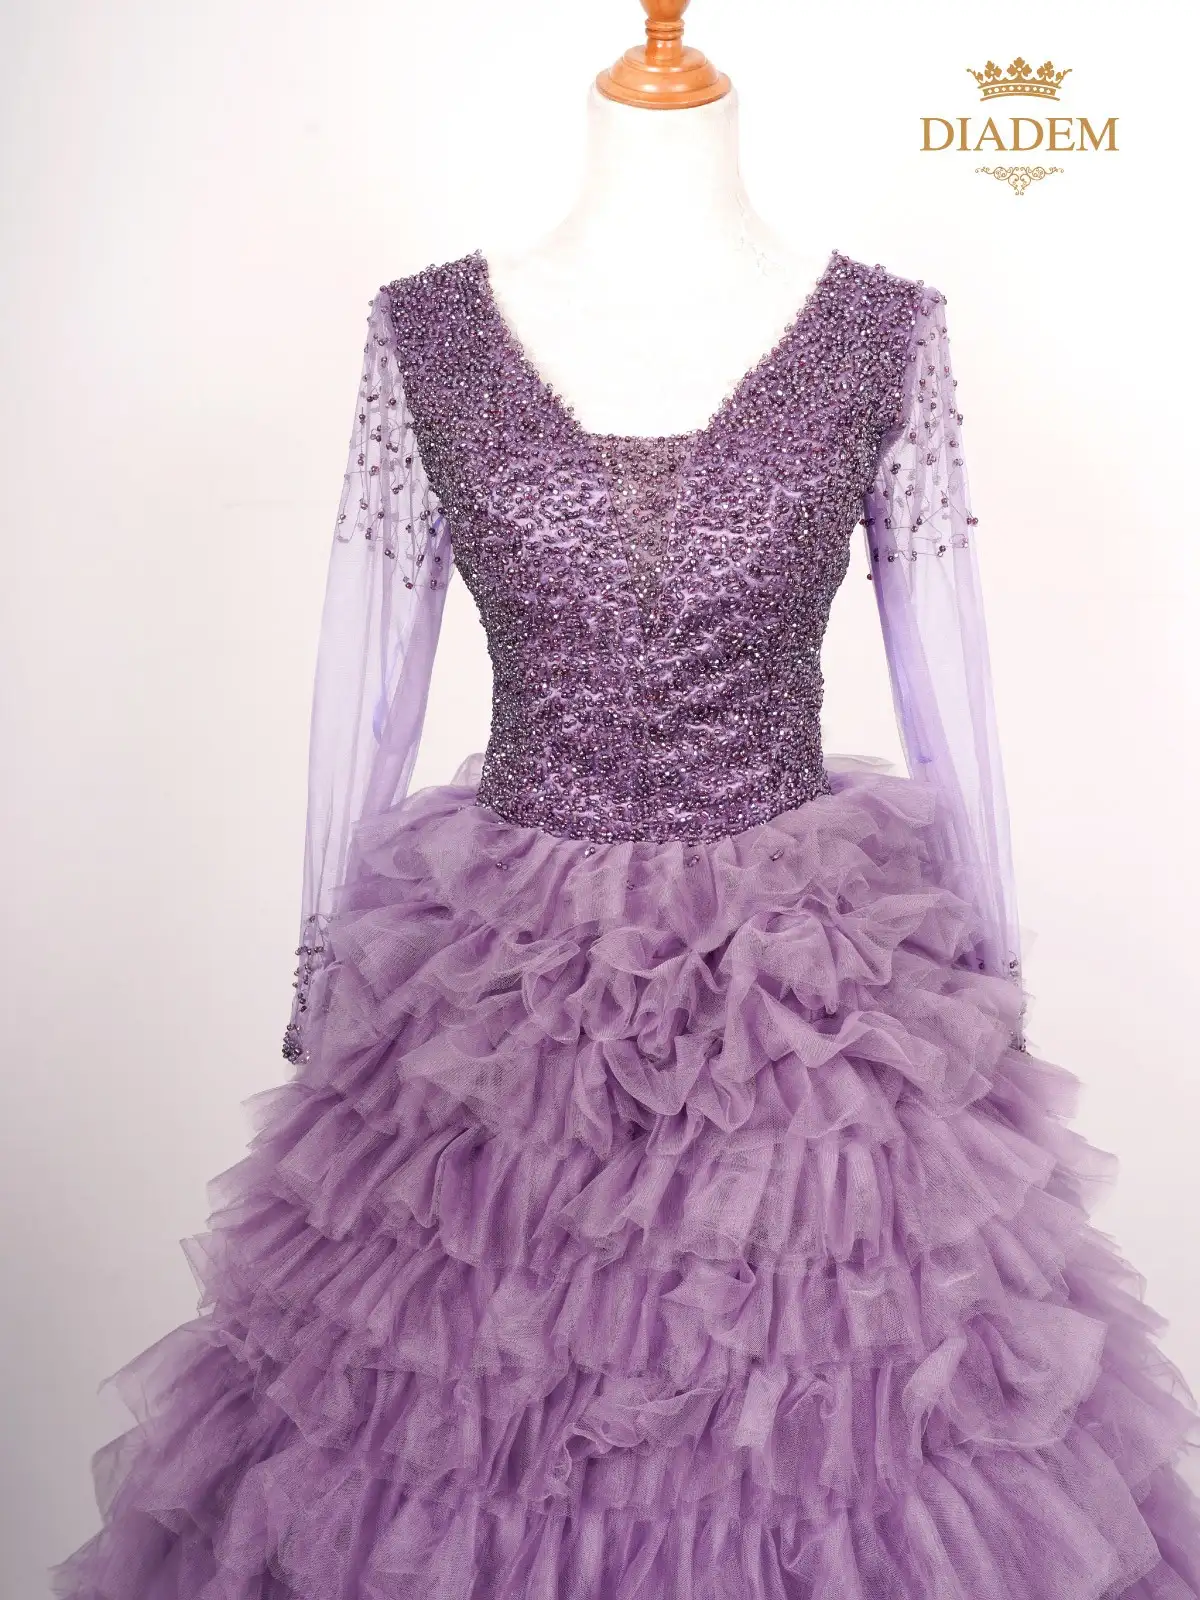 Lavender Gown Embellished With Crystal Beads And Frilled Bottom